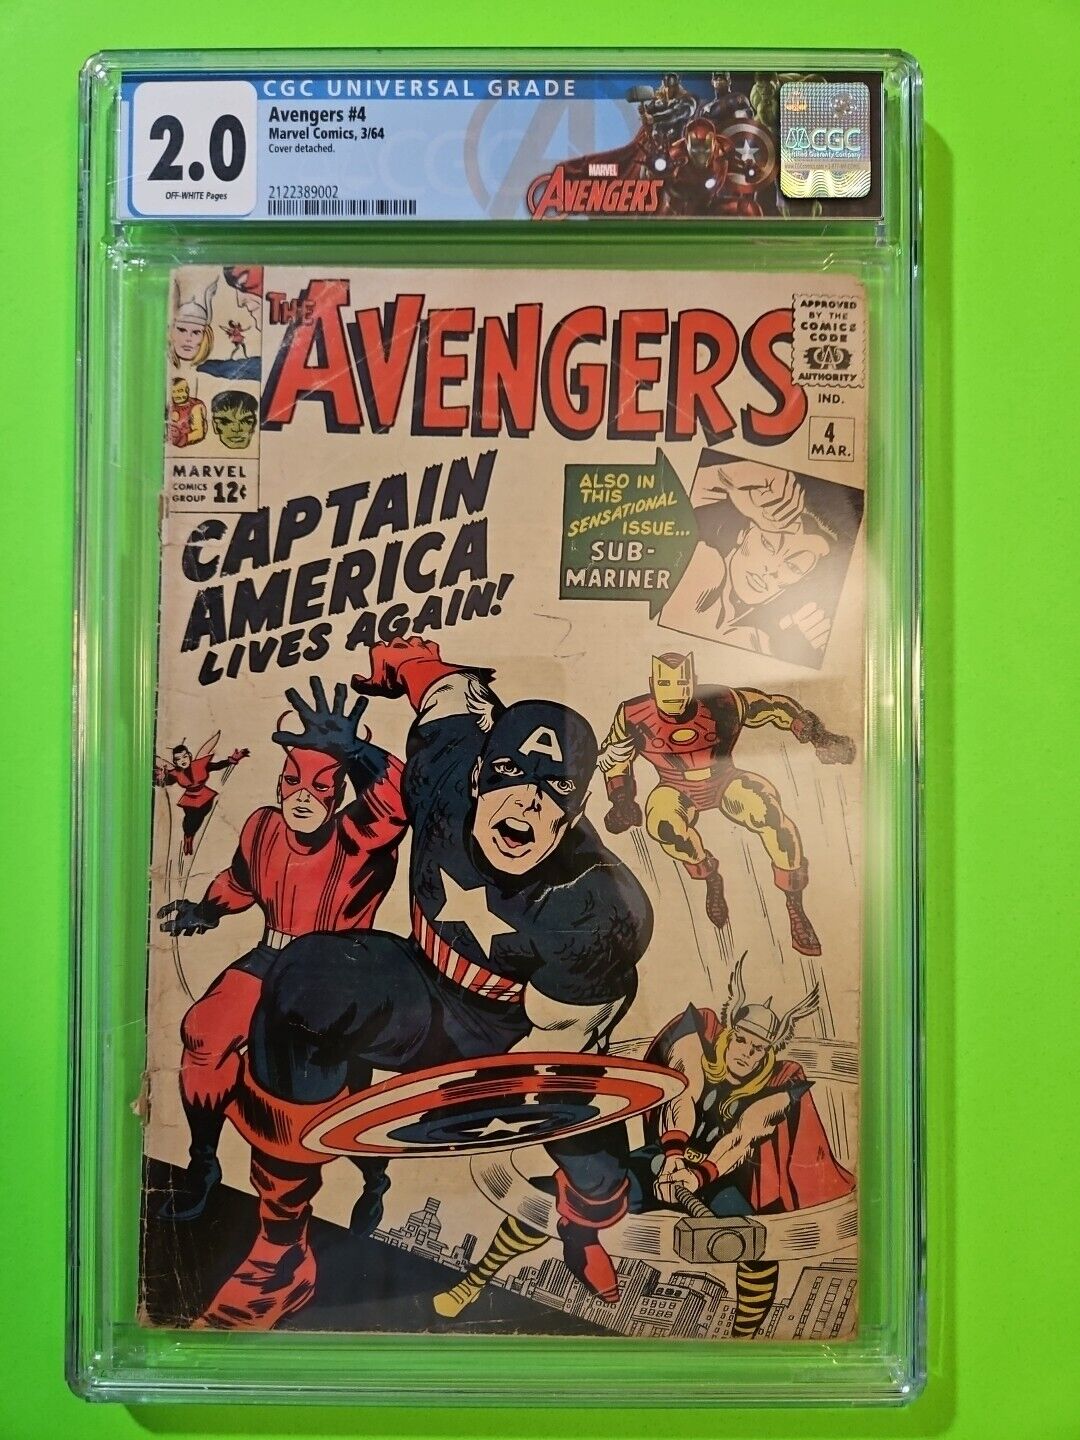 Avengers #4 FIRST Silver Age Captain America CGC 2.0 AVENGERS LABEL 